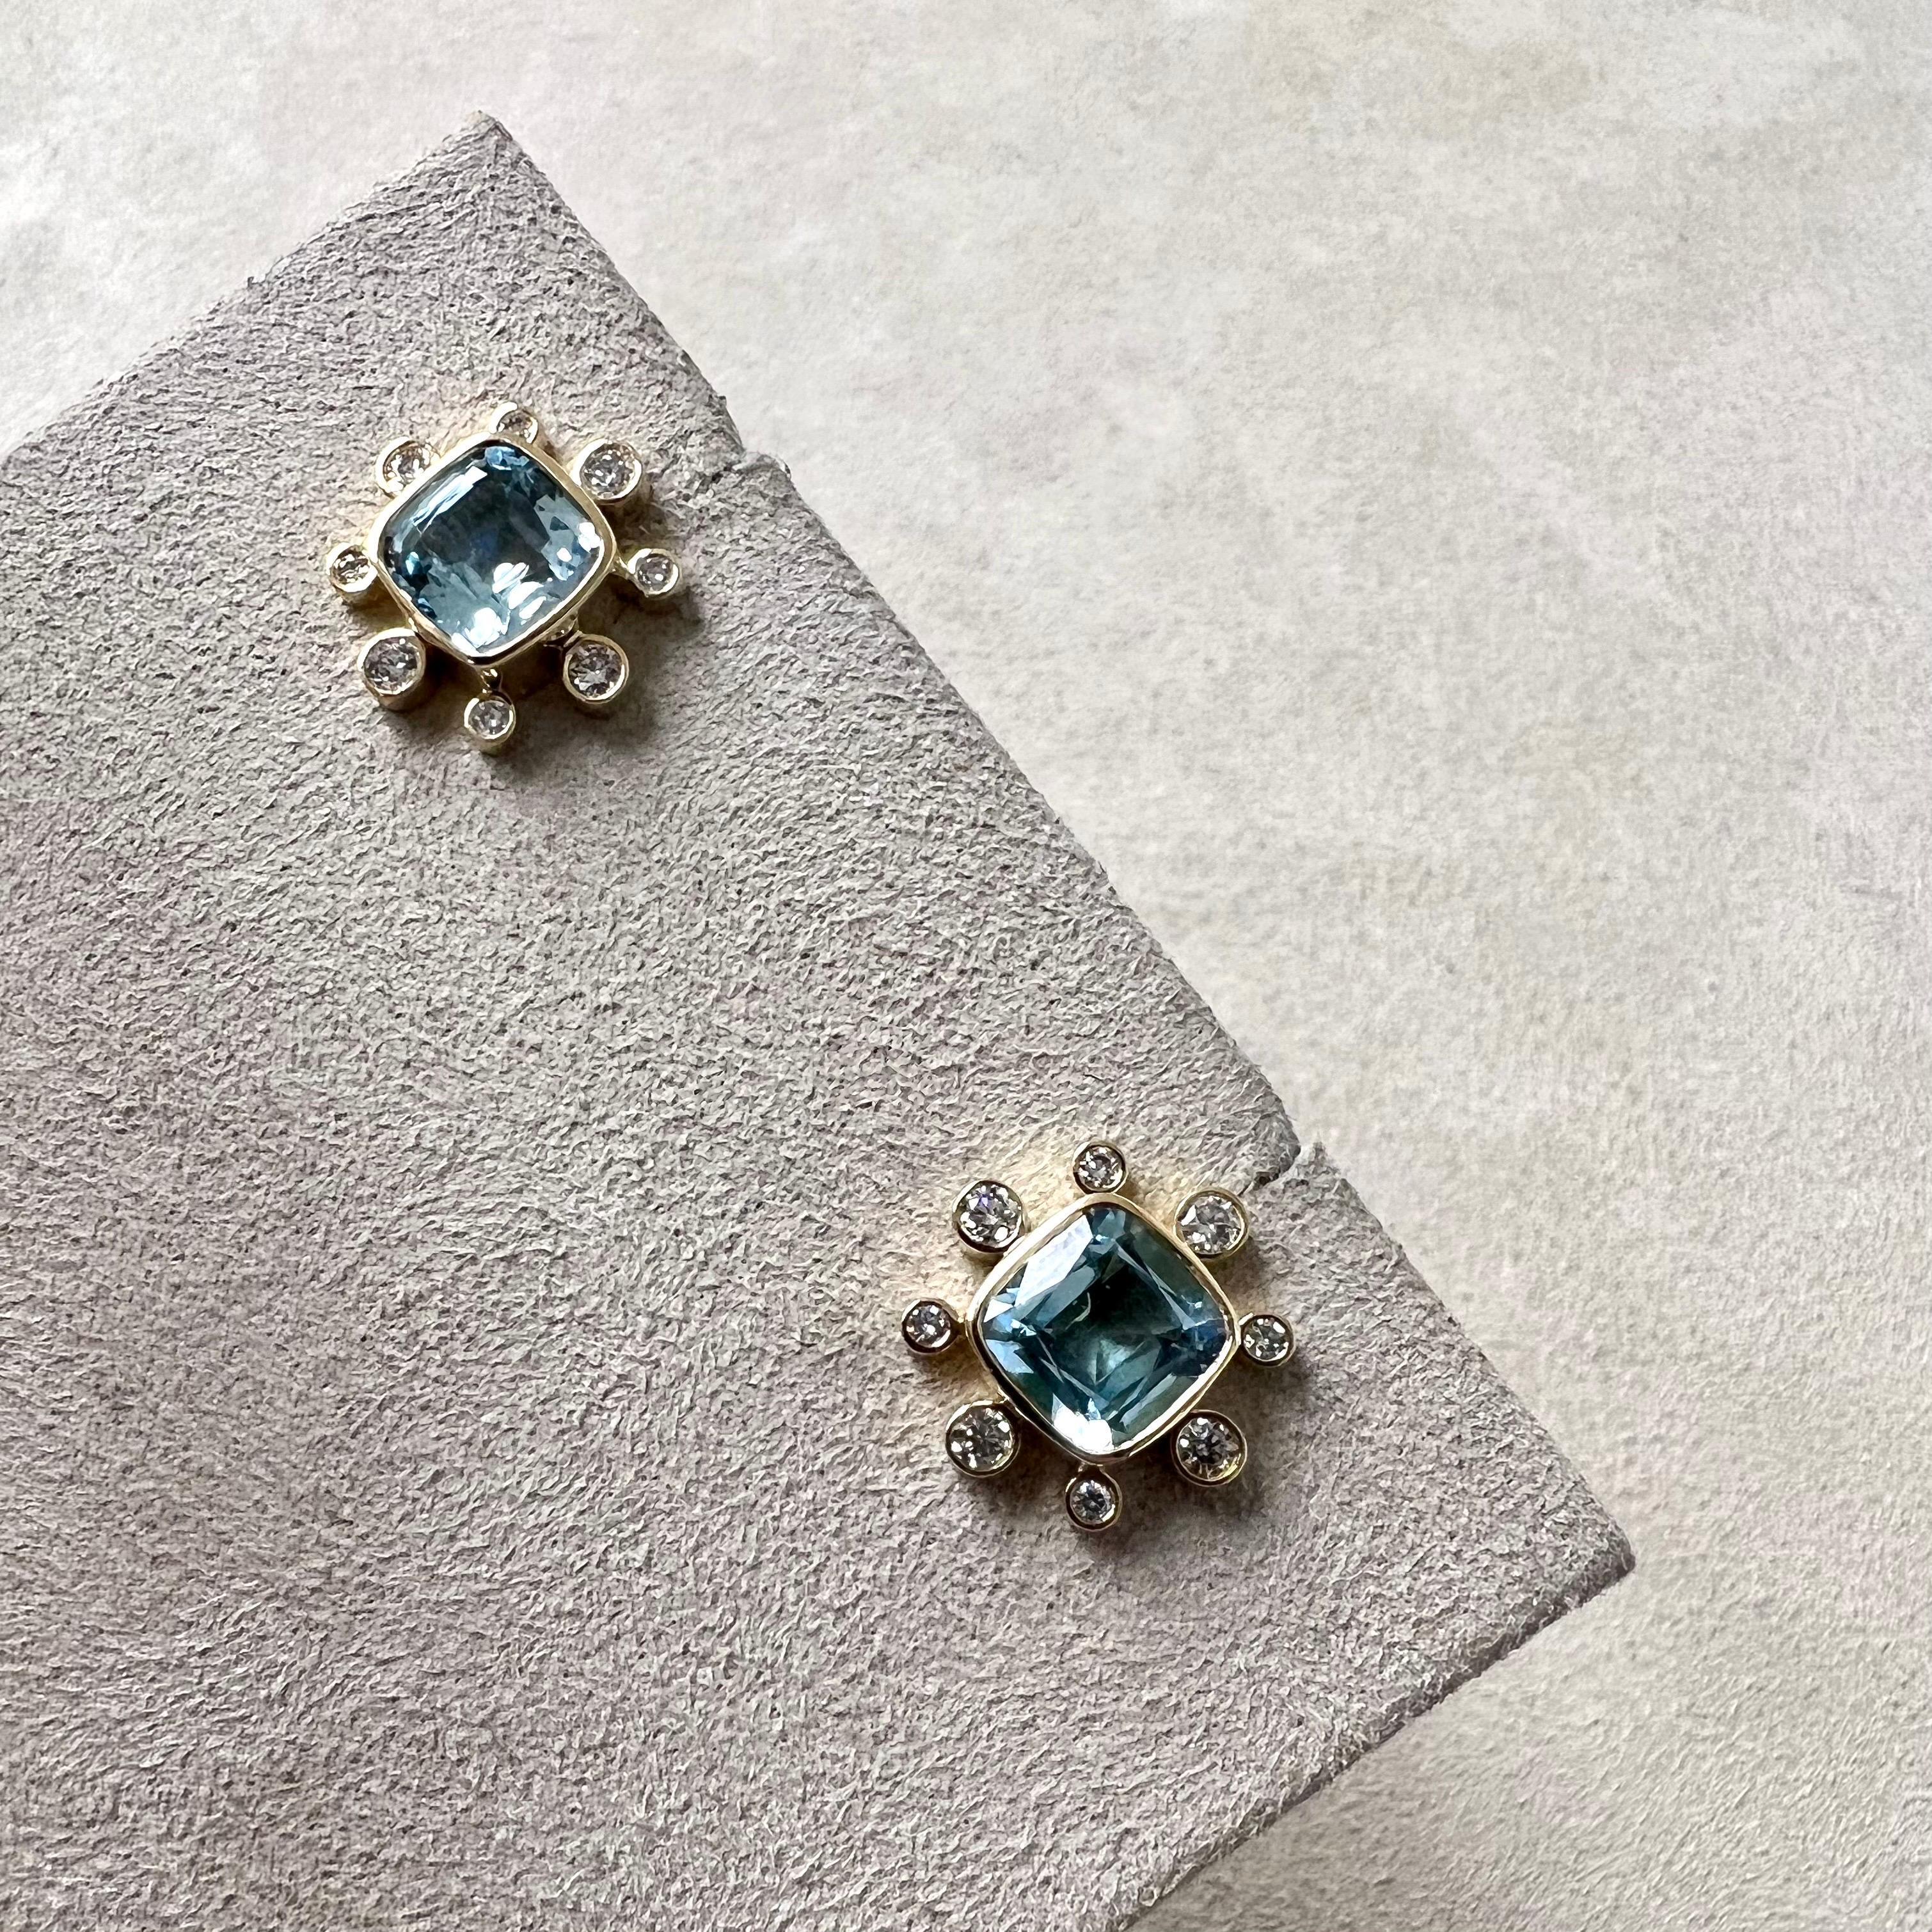 Created in 18 karat yellow gold
Blue topaz 3.30 carats approx.
Diamonds 0.35 carat approx.
18kyg butterfly backs for pierced ears
Limited edition

Exquisitely crafted in lustrous 18 karat yellow gold, this limited edition adornment showcases a